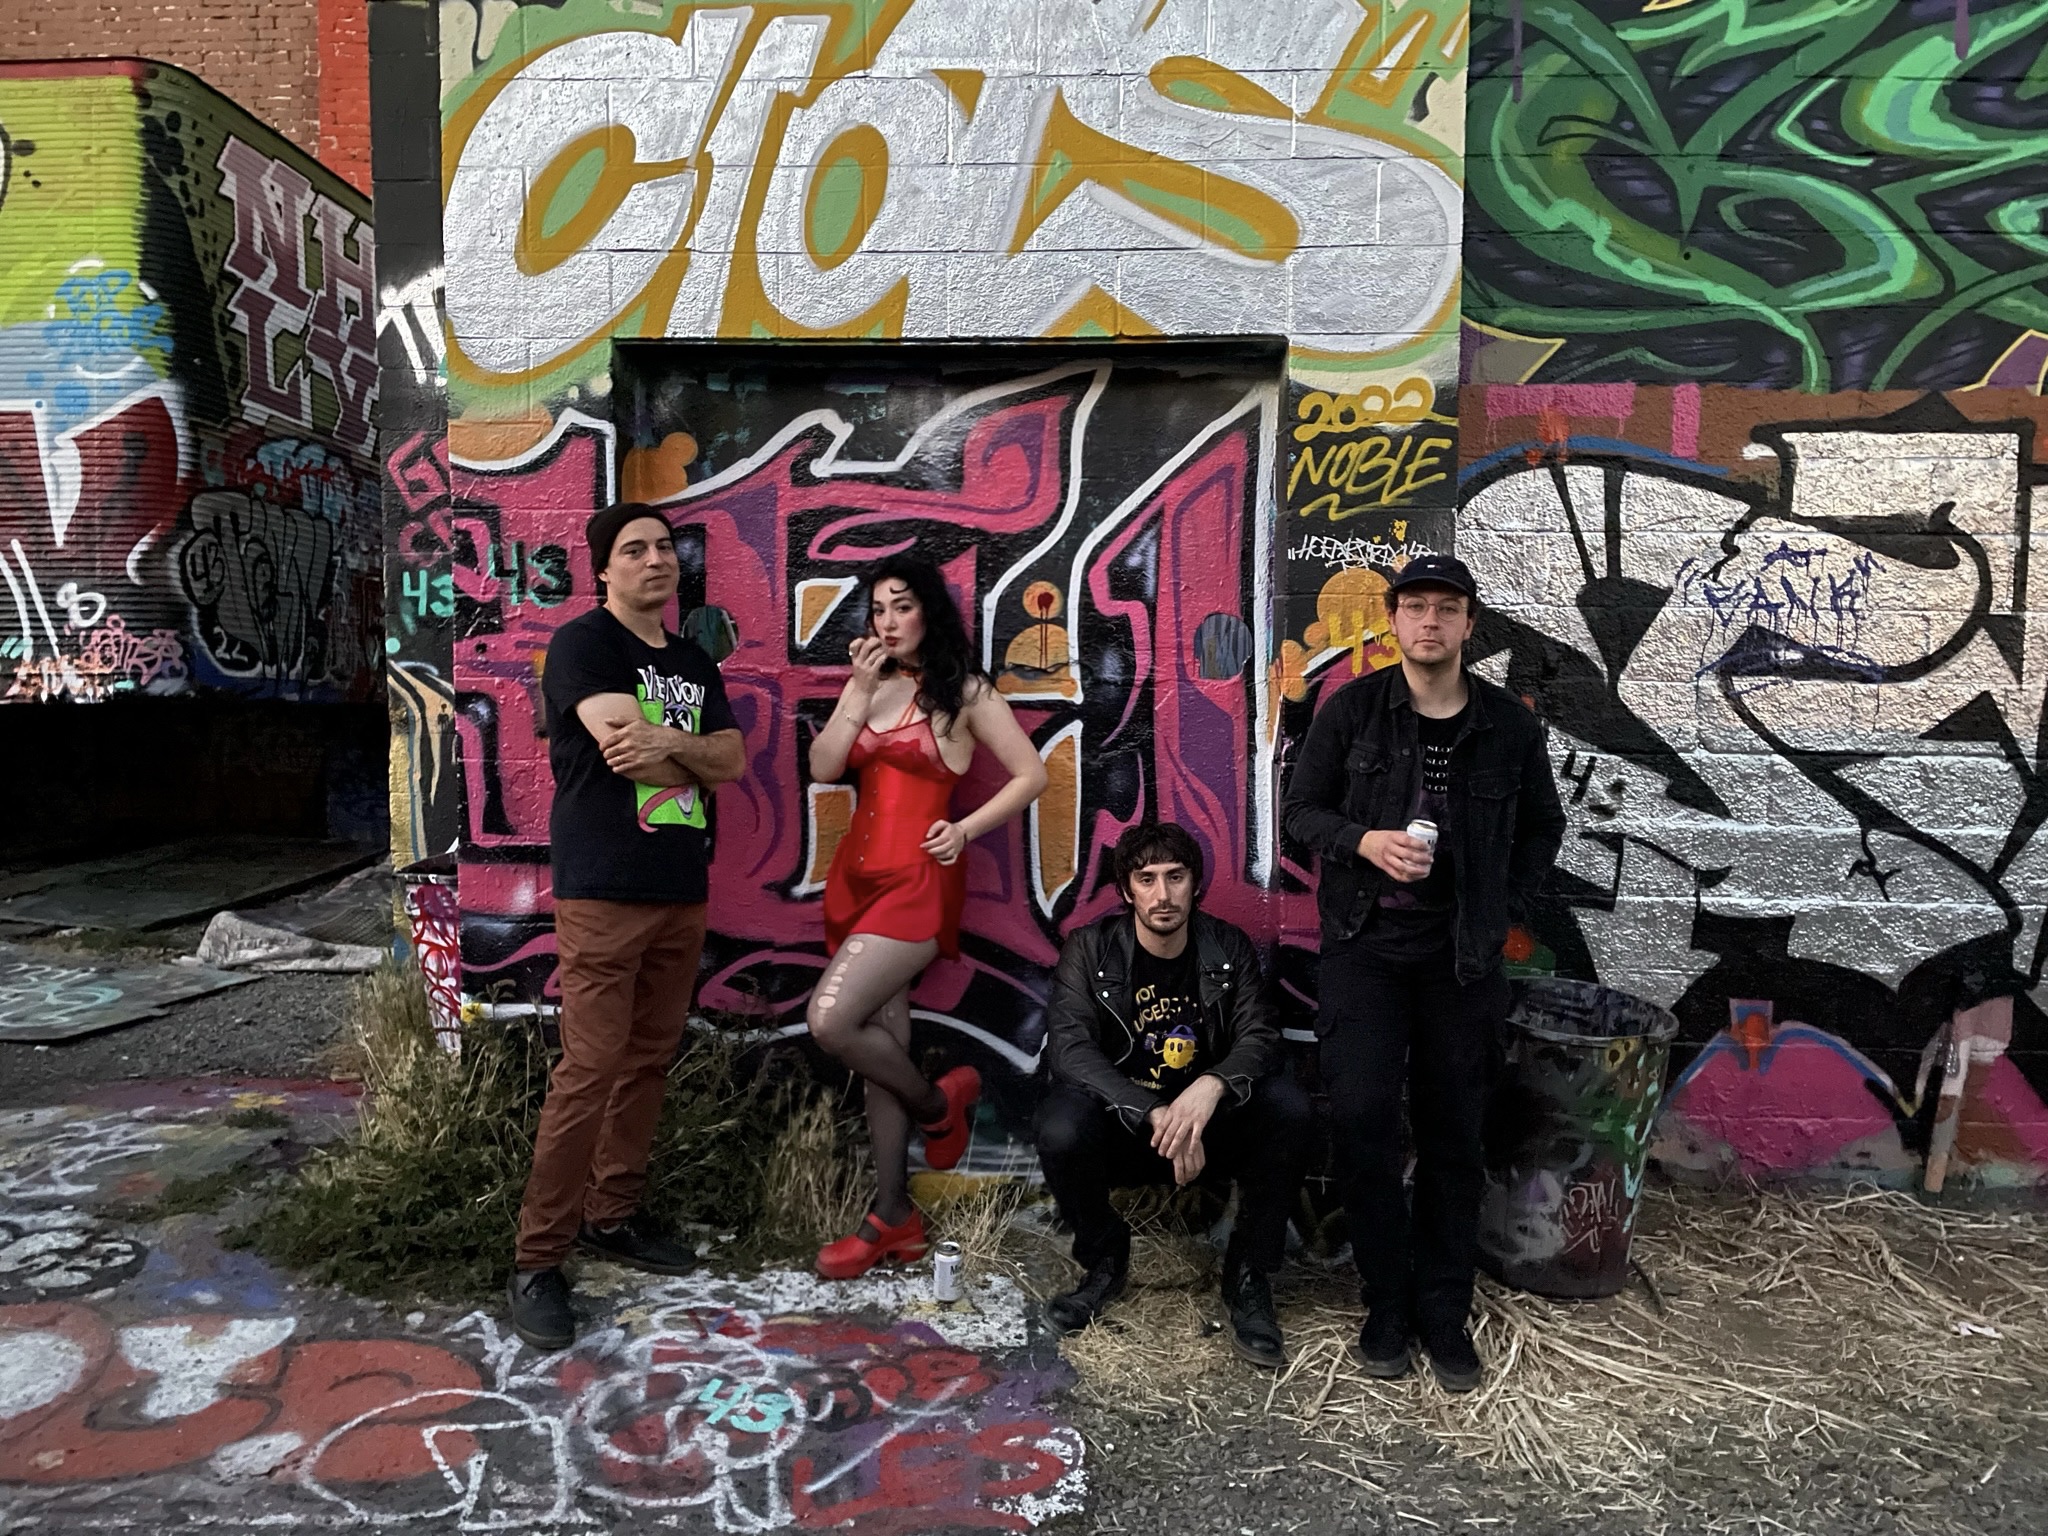 Fauxes musical quartet posed in front of a graffiti-covered wall.